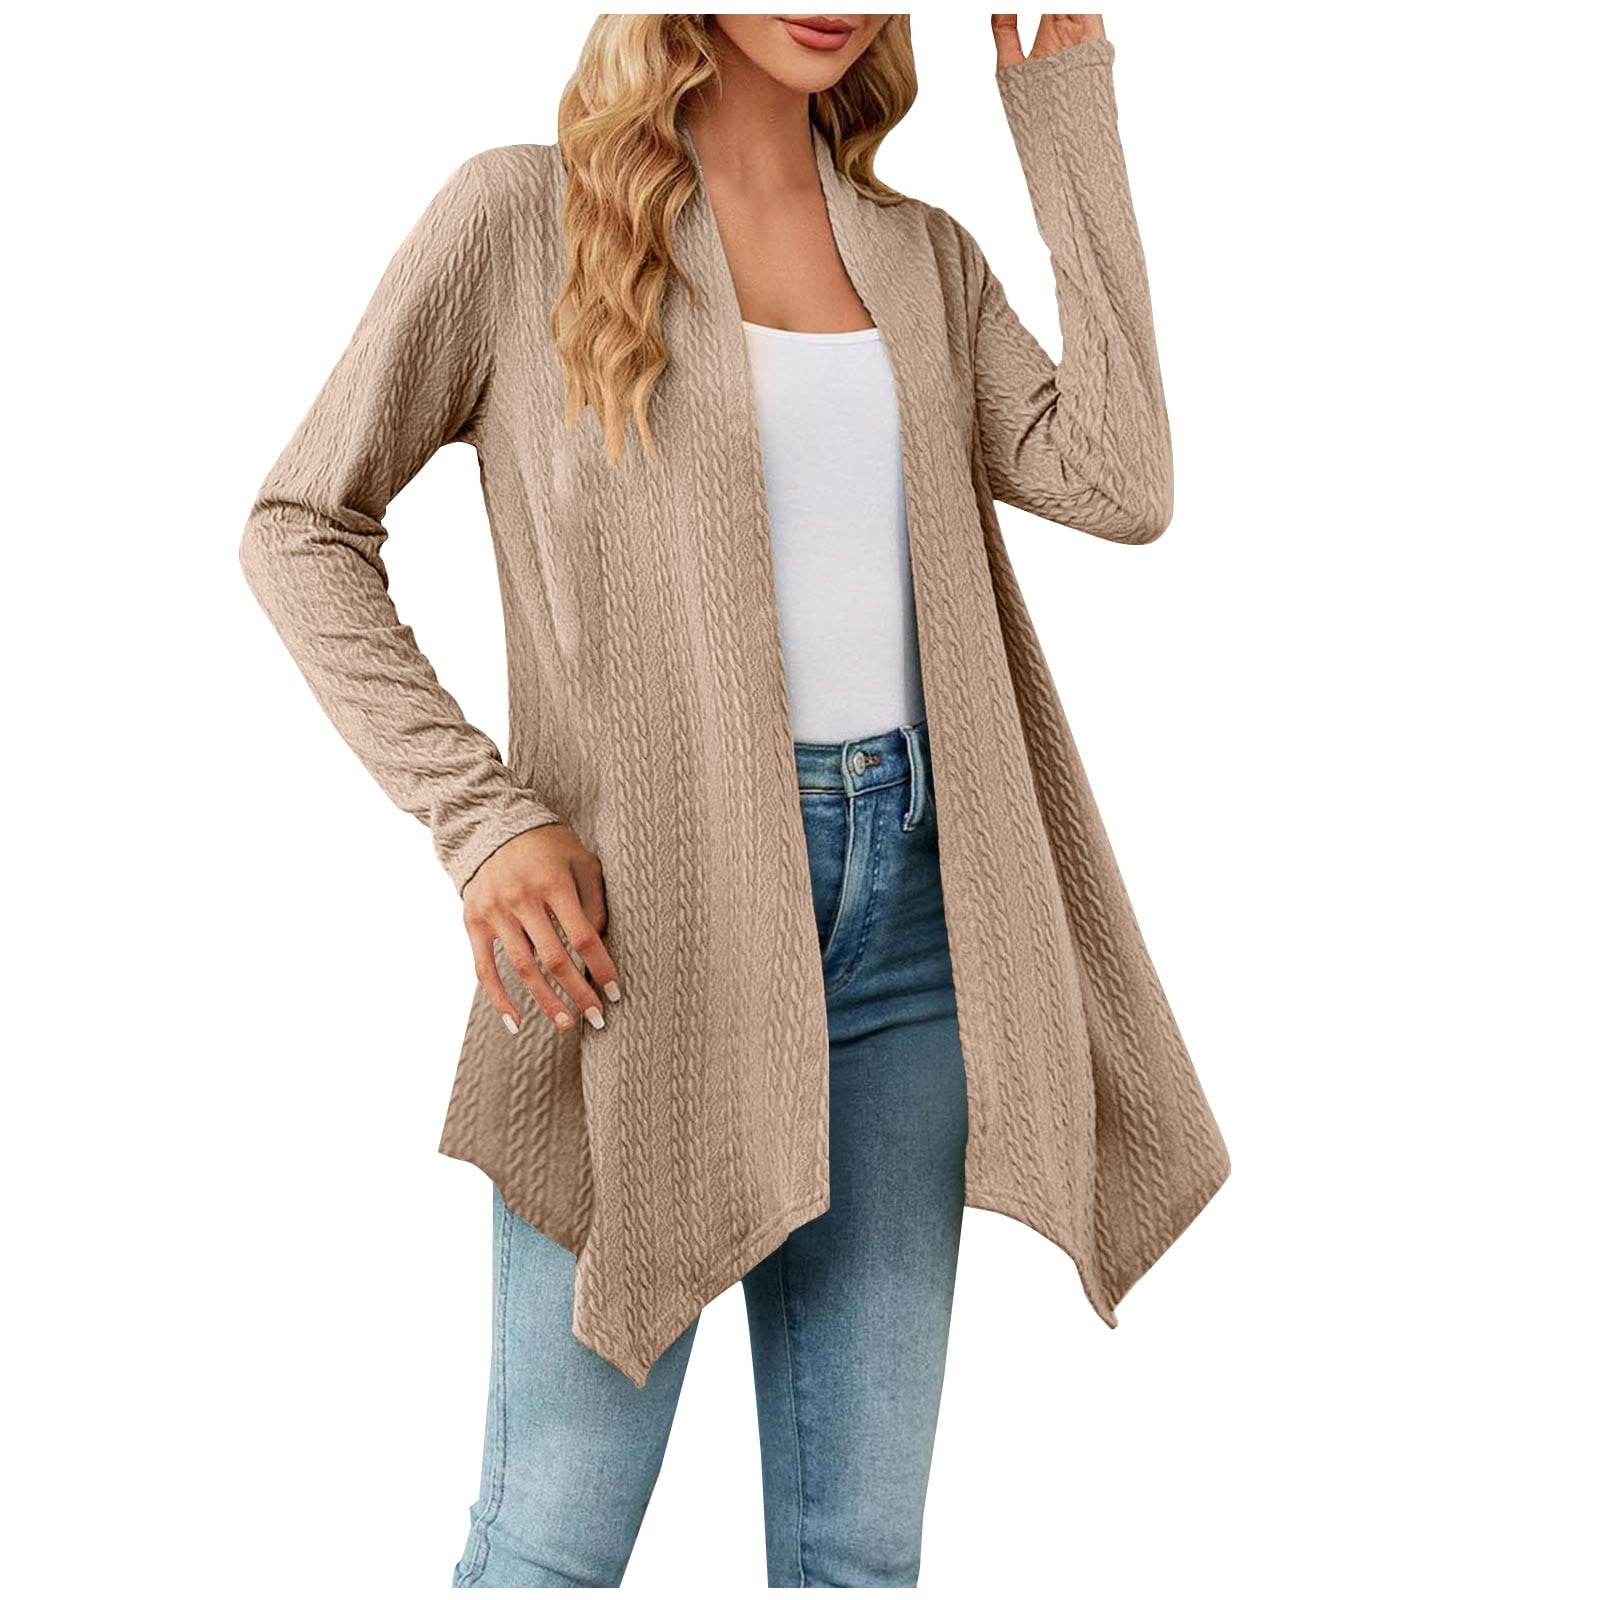 OPEN FRONT CARDIGAN, Fashion OPEN FRONT CARDIGAN